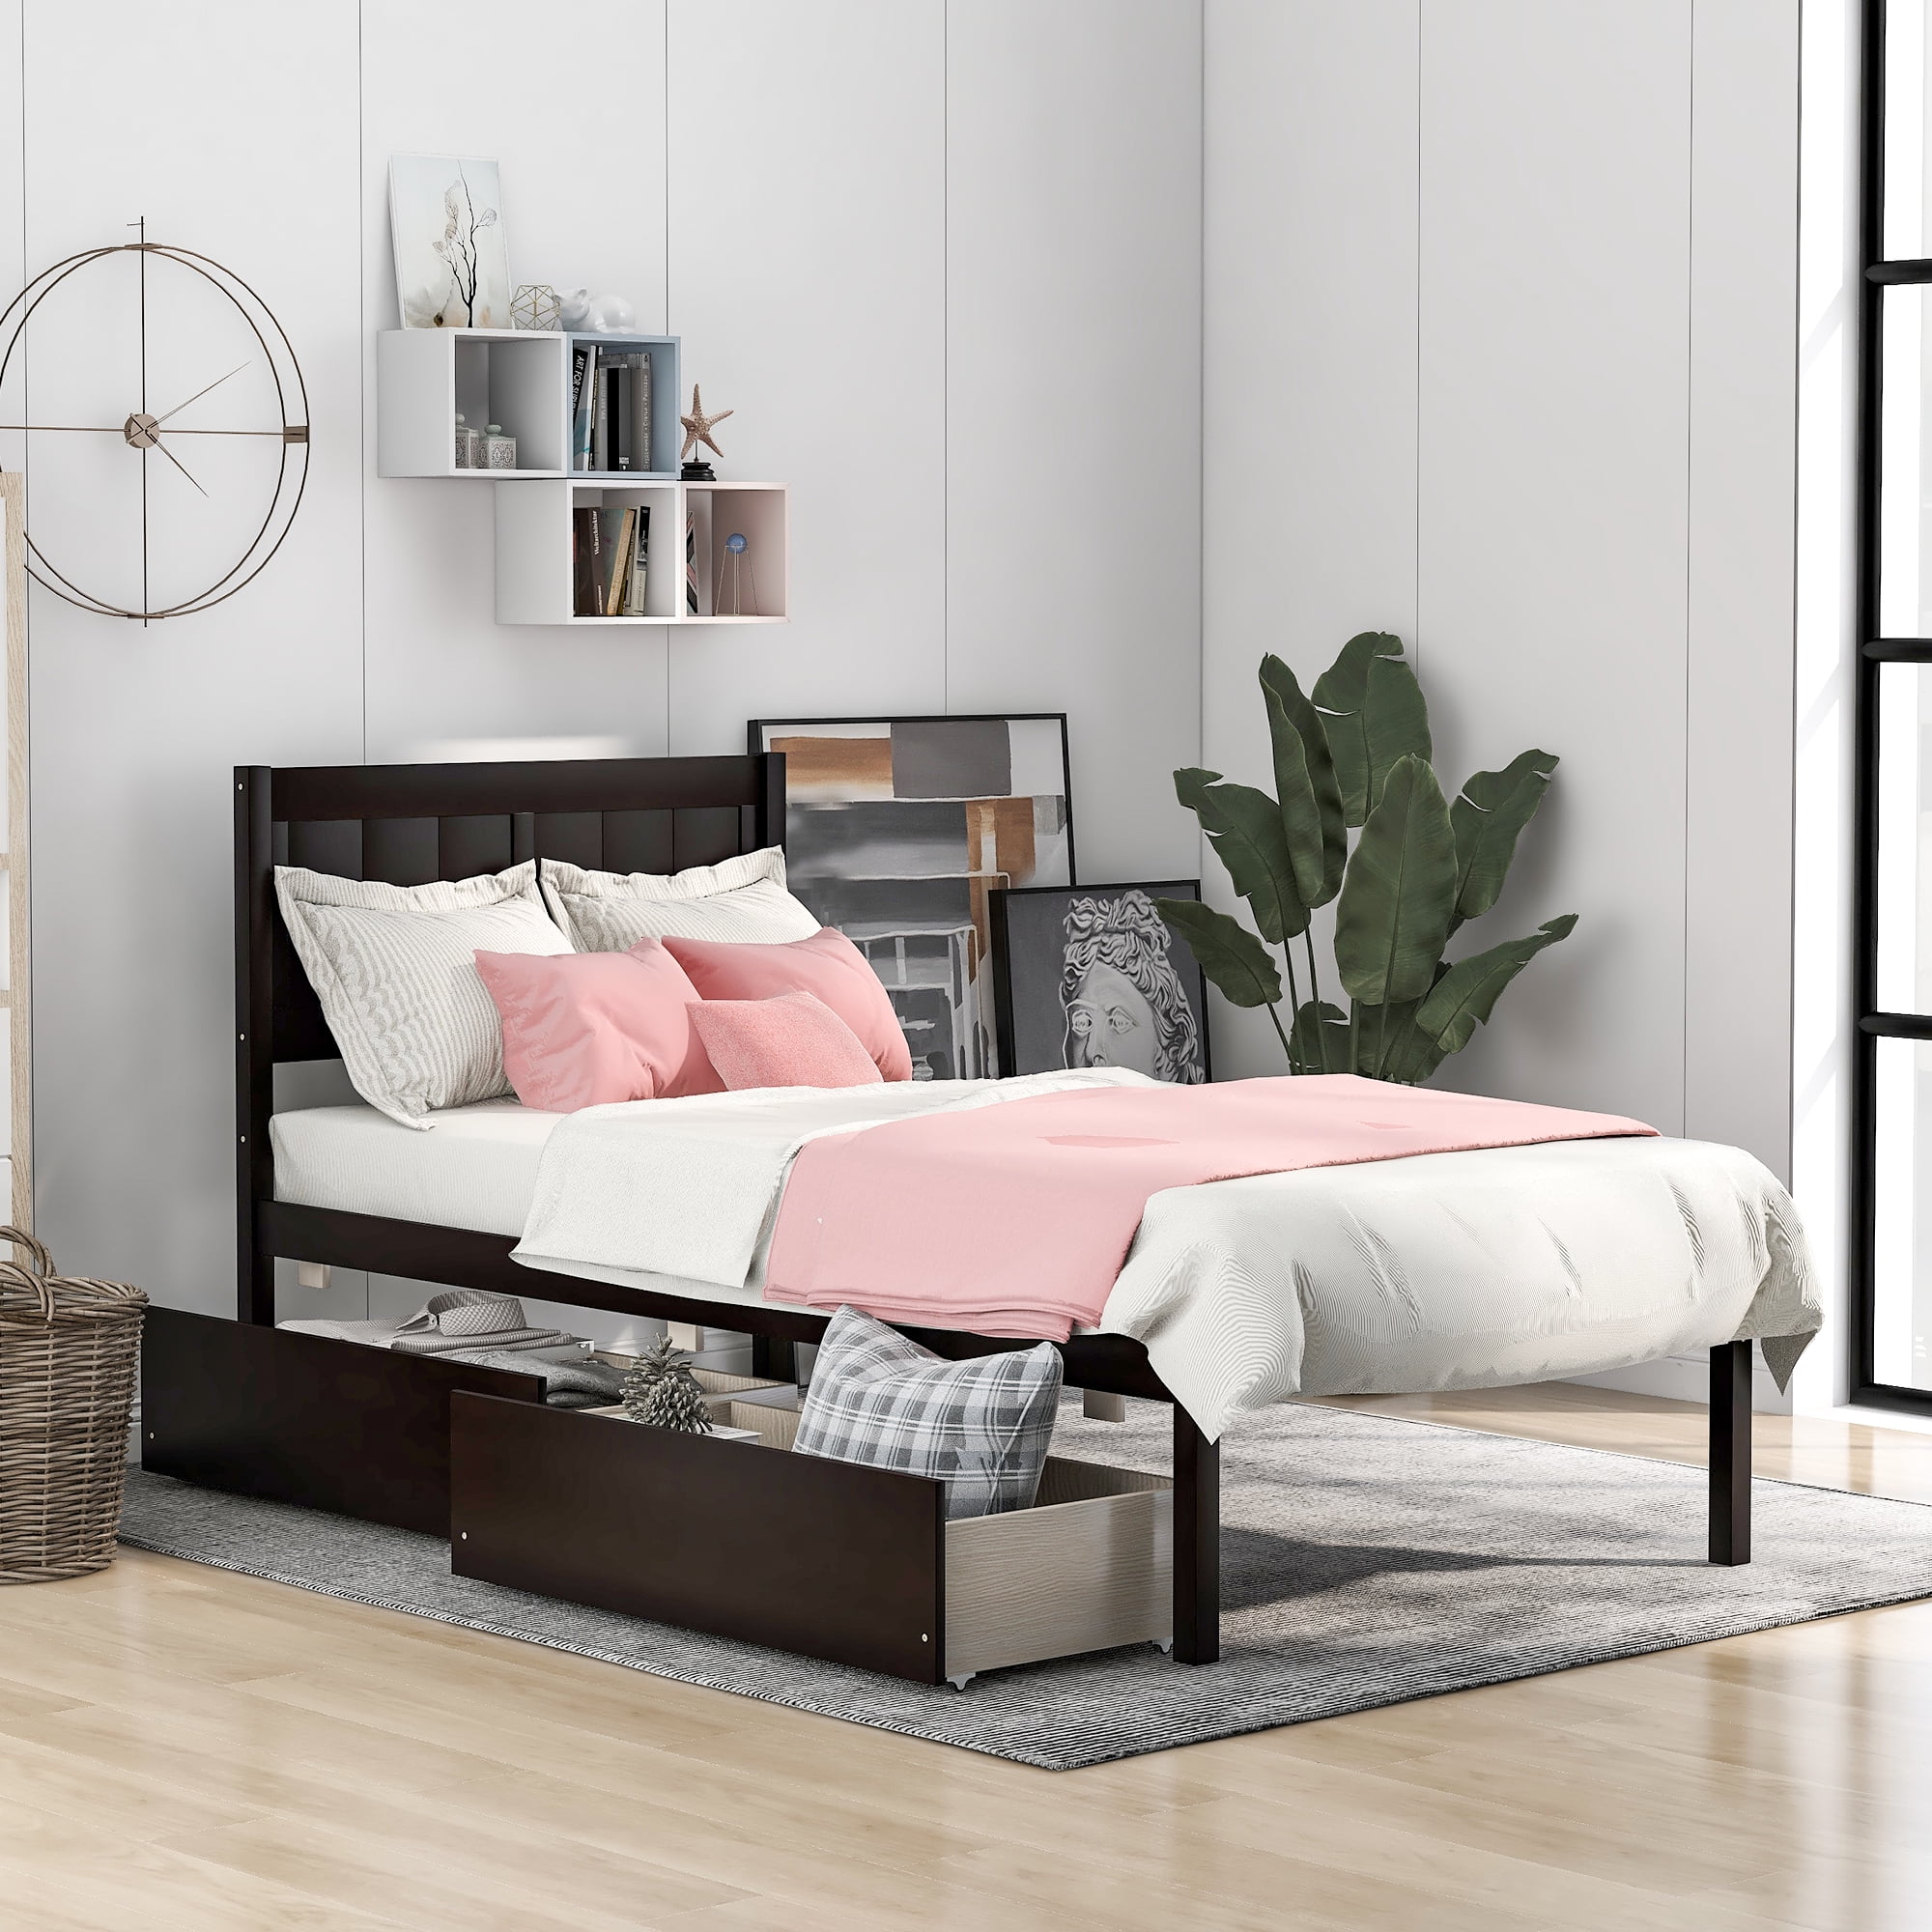 Twin Platform Bed With 2 Drawers, Minimalist Twin Bed Frame With Storage